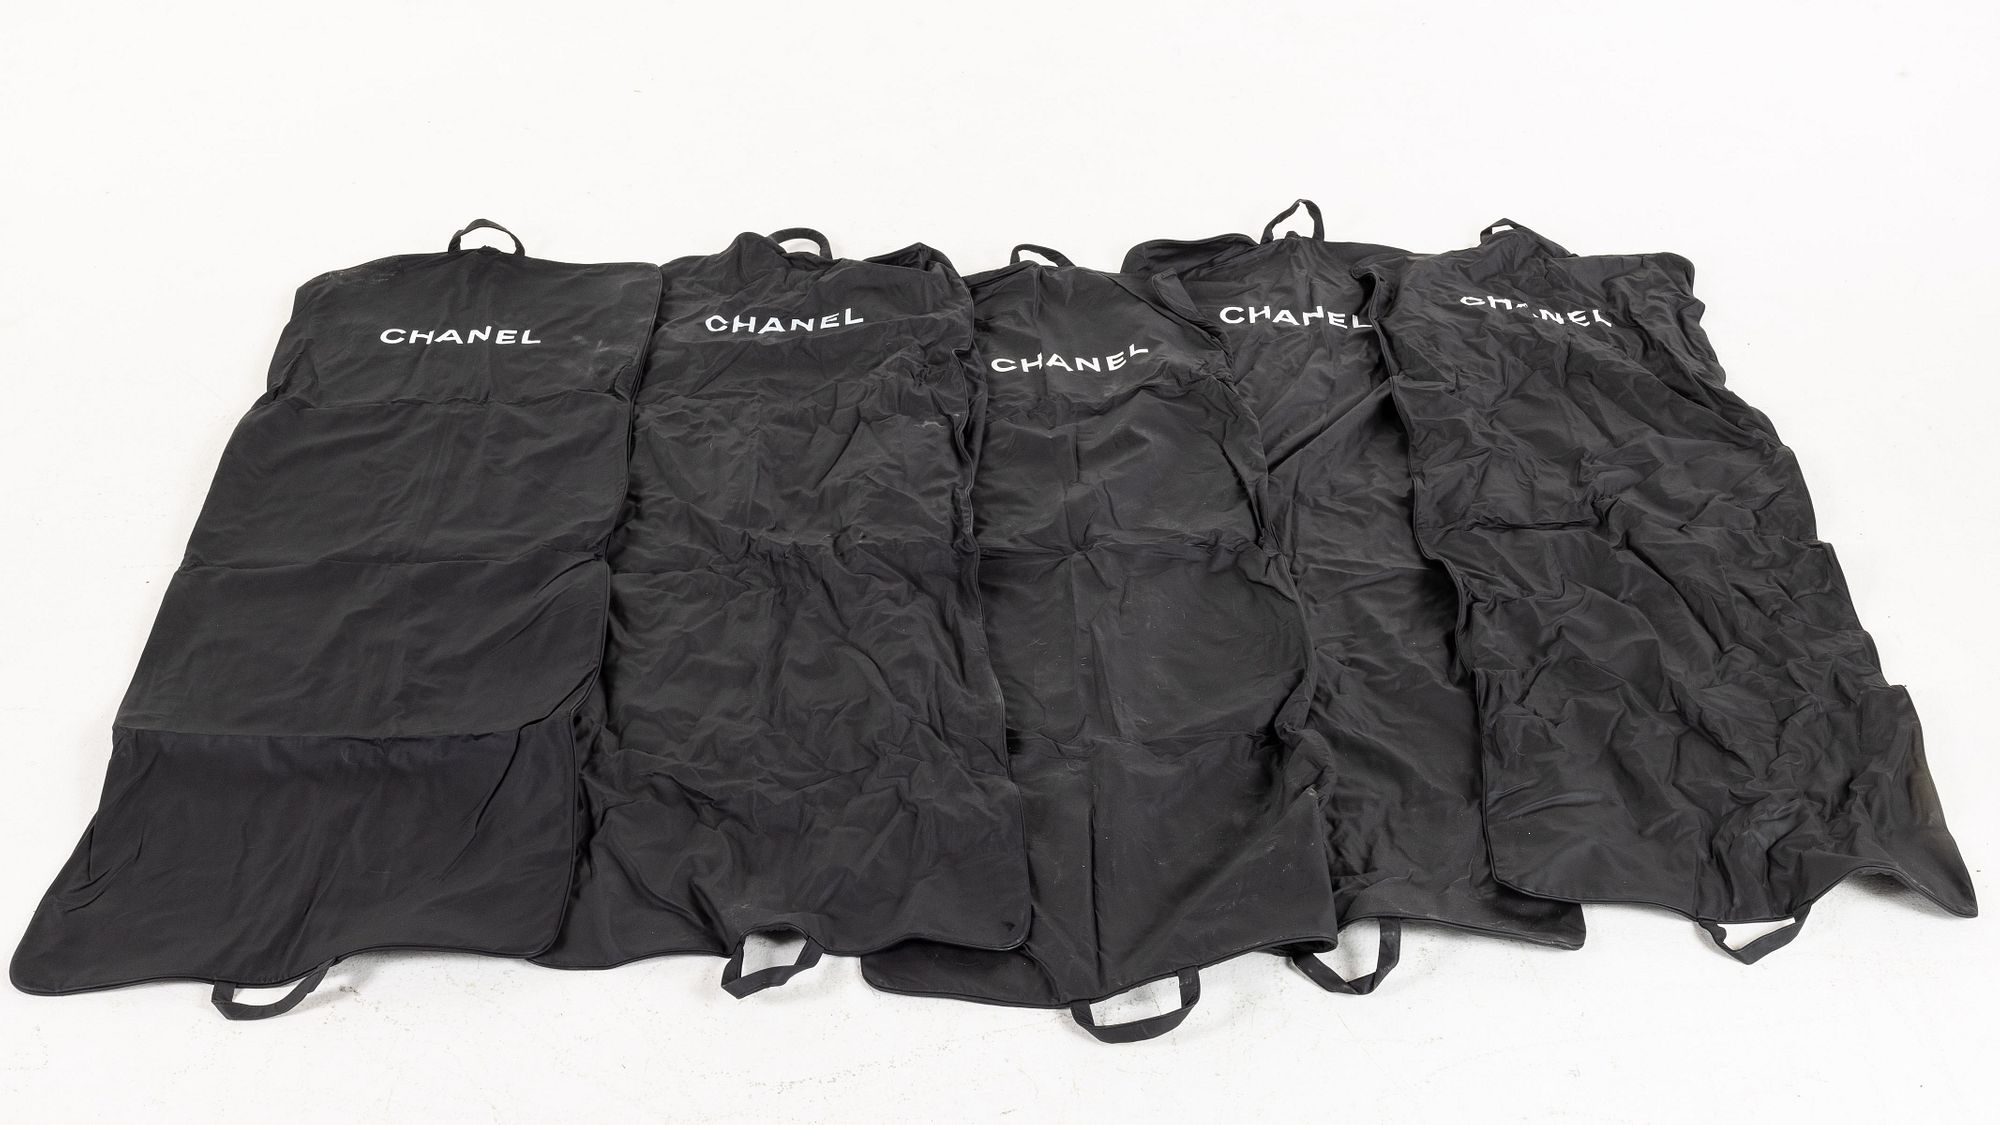 5 Long Chanel Garment Bags sold at auction on 1st March